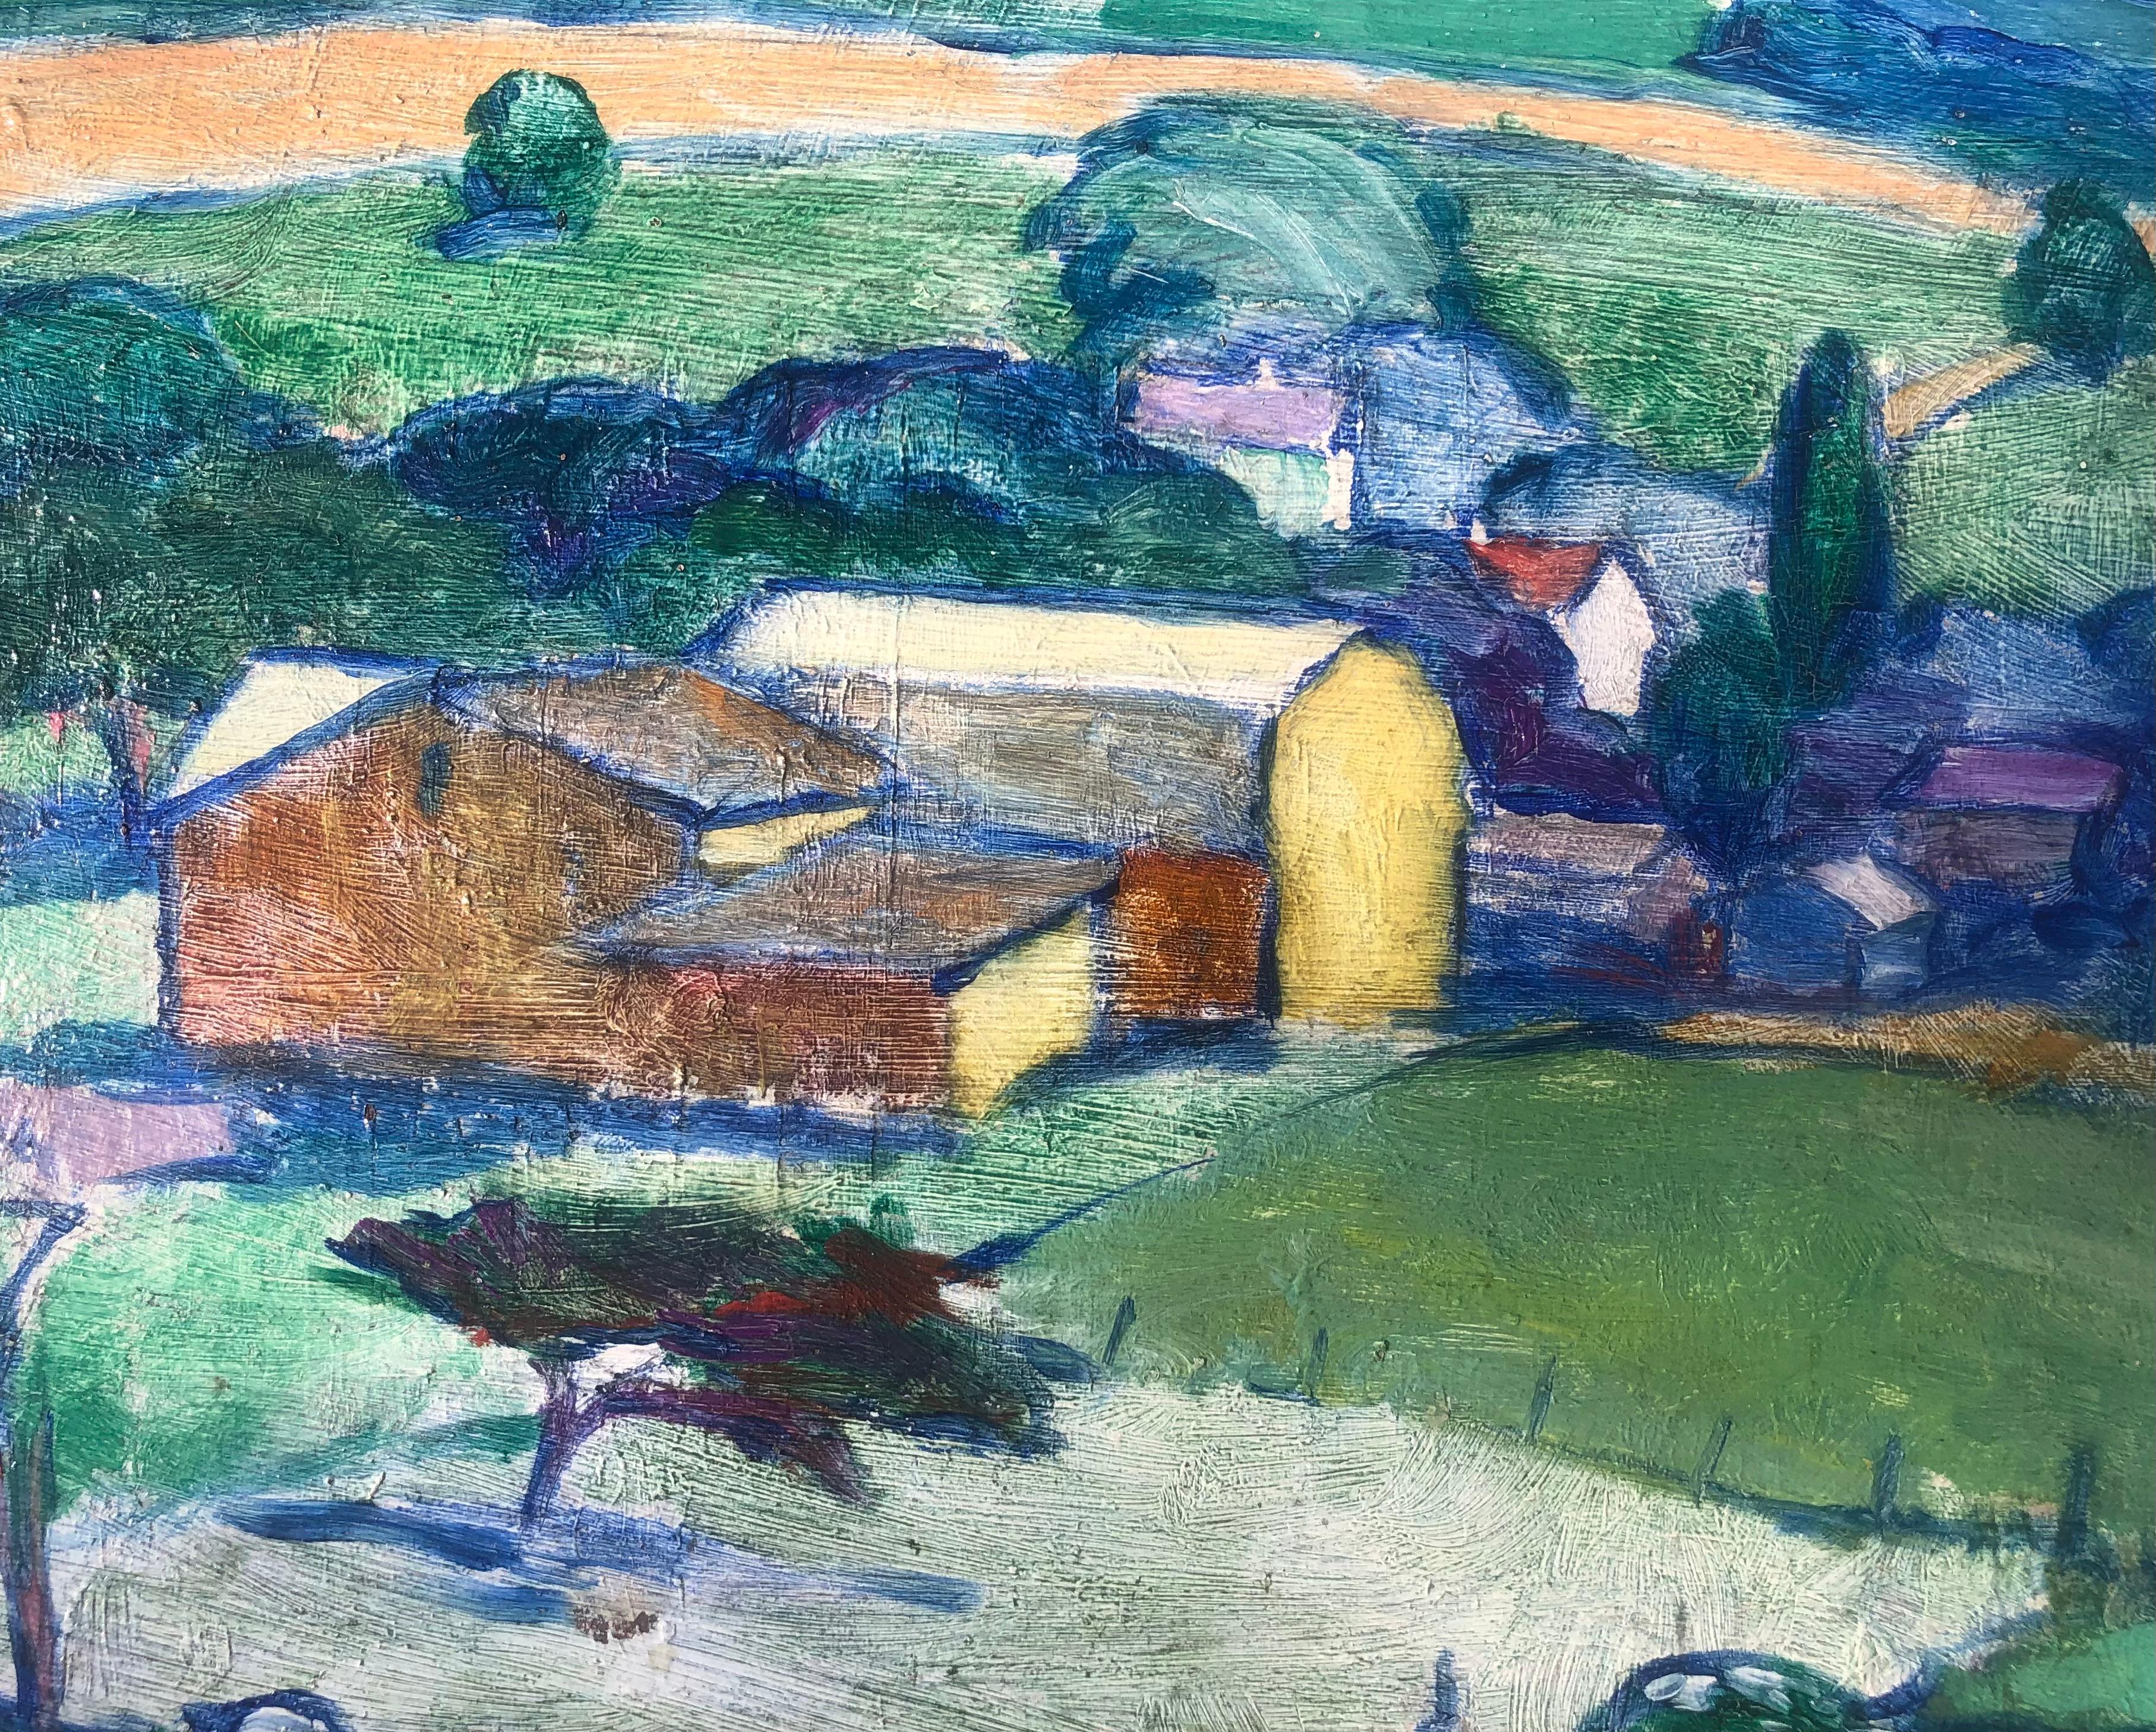  French Impressionist School O/B Landscape - 1911 - After Cezanne - Painting by Rufus Dryer